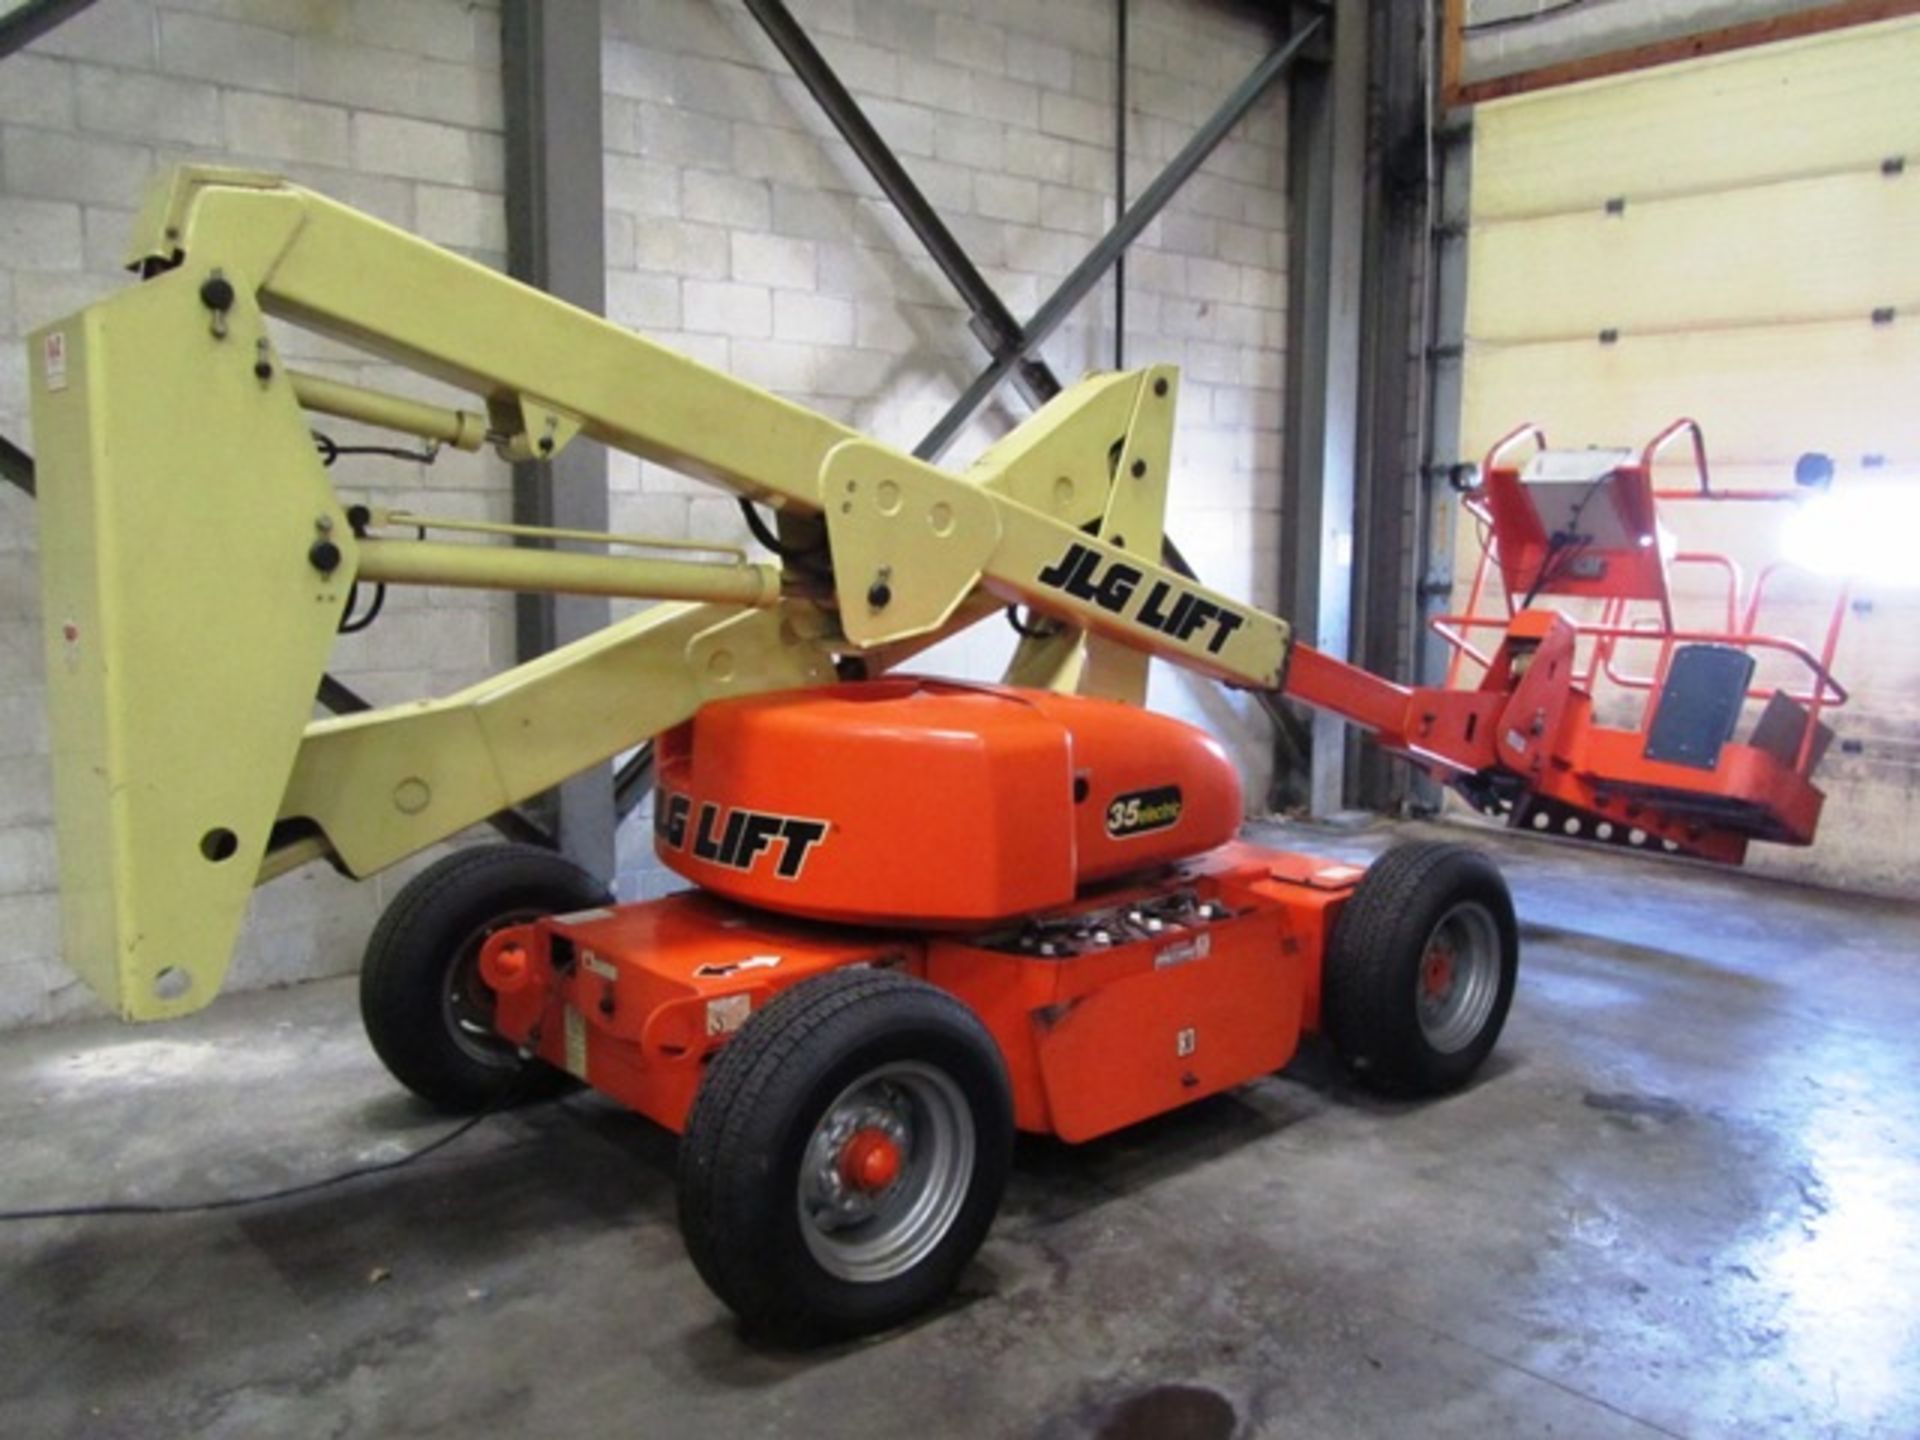 JLG 500lb Capacity Extended Reach Portable Electric Manlift with 35' Capacity, sn:0092080300018833